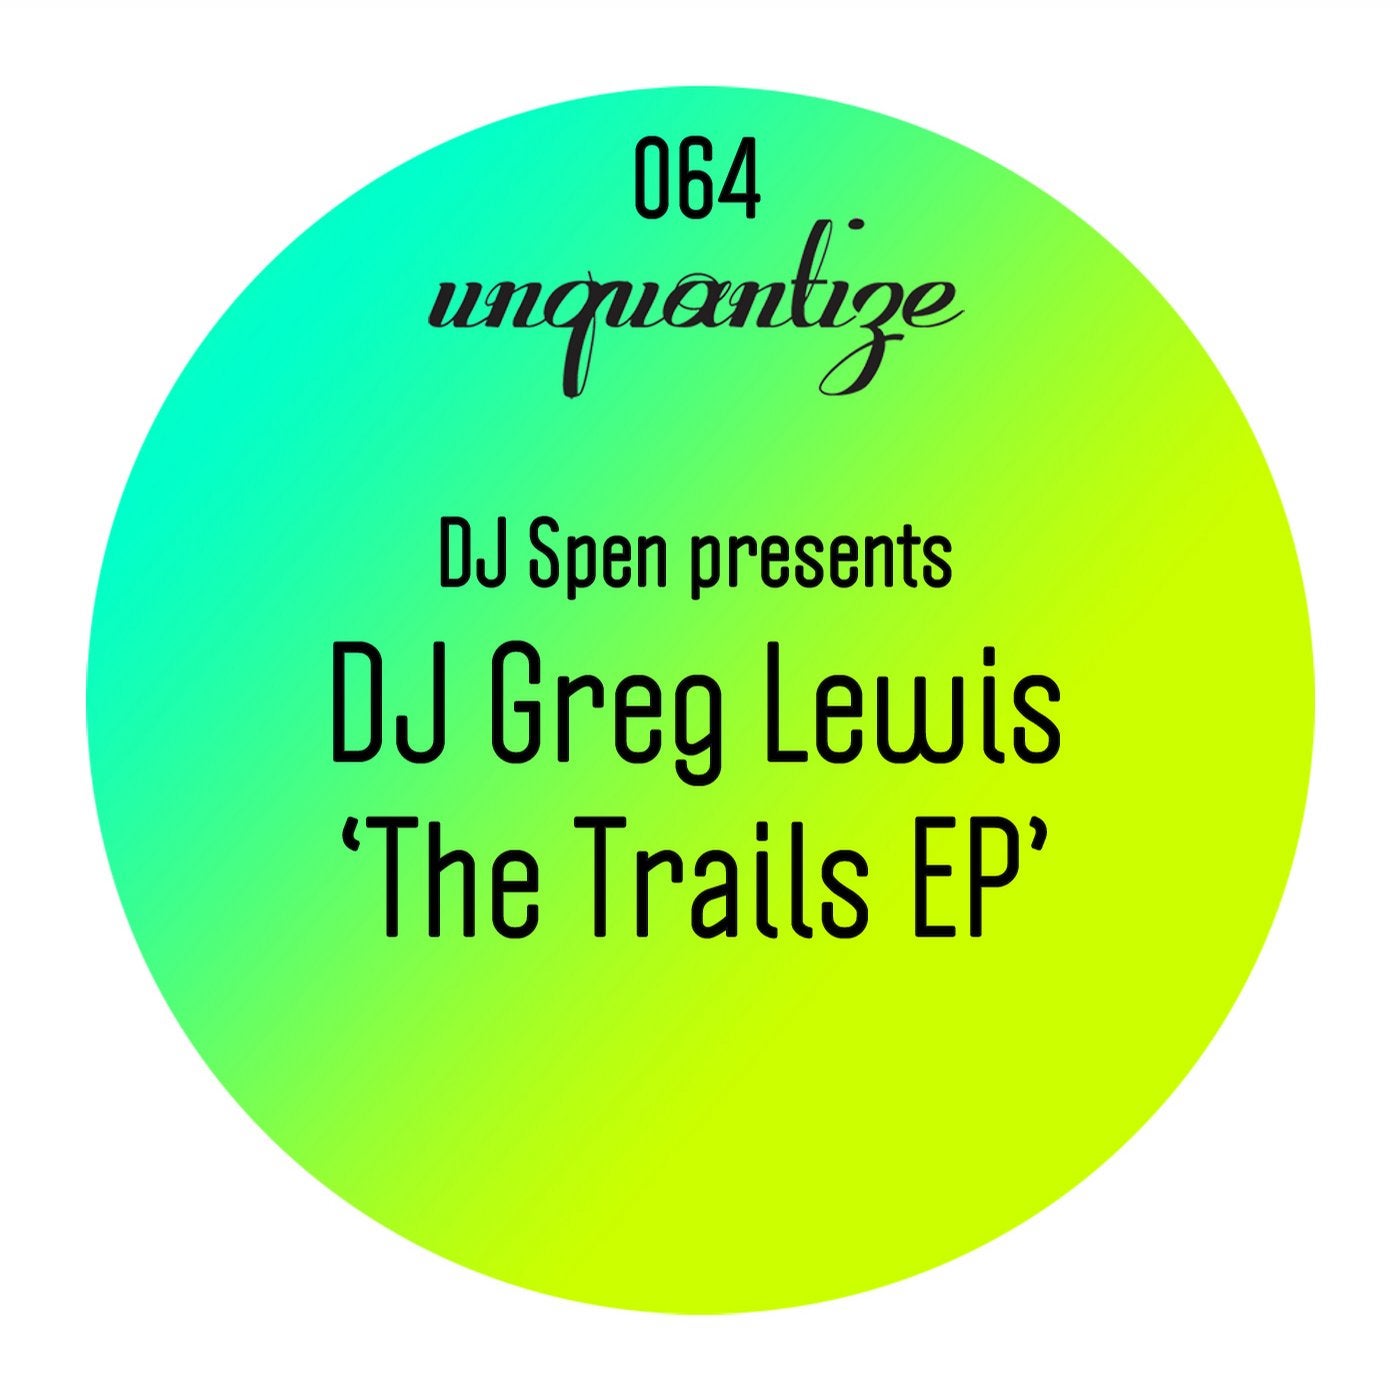 The Trails EP